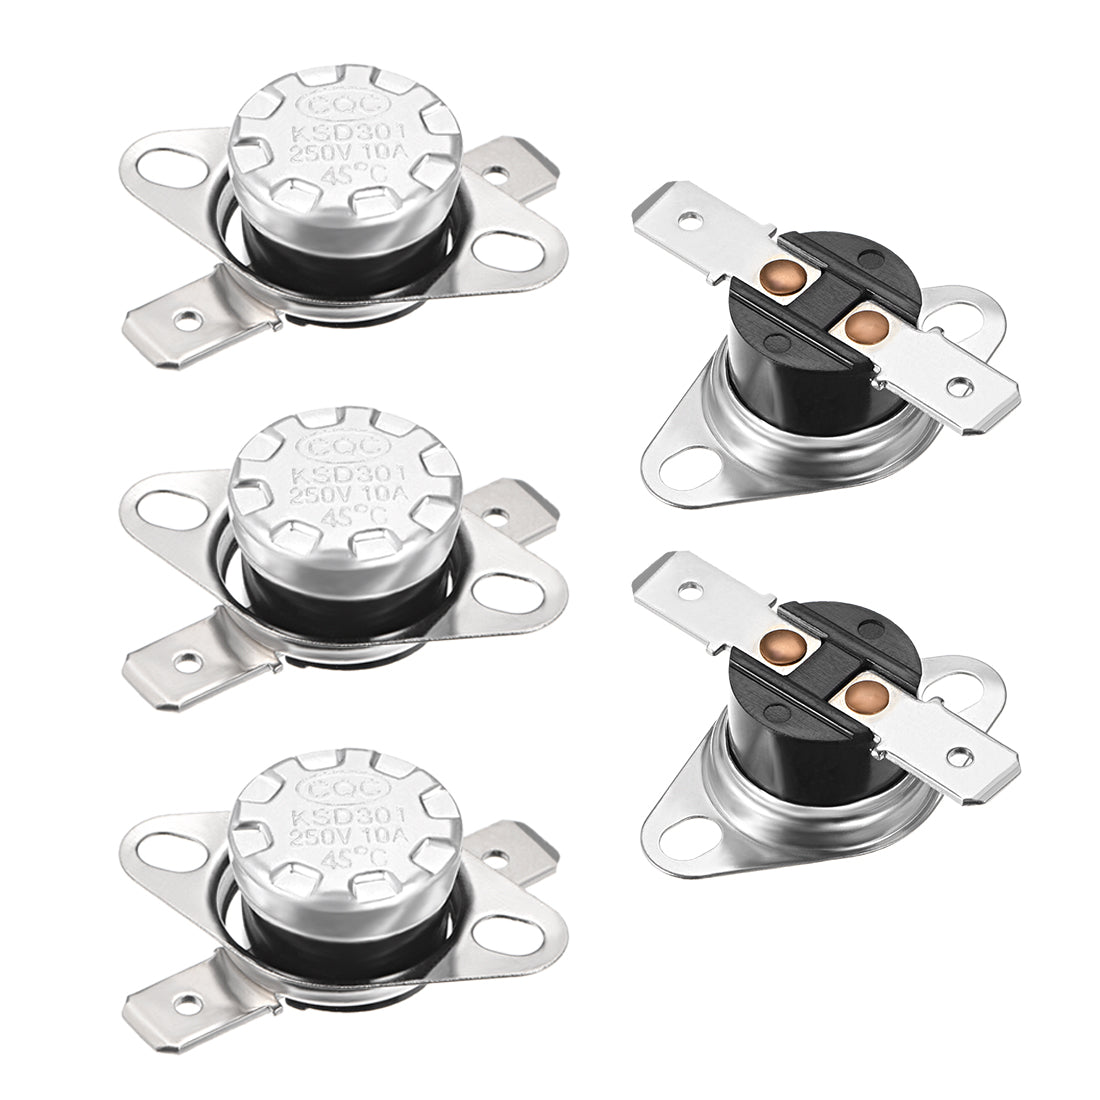 uxcell Uxcell Temperature Control Switch , Thermostat , KSD301 45°C , 10A , Normally Closed N.C 6.3mm Pin 5pcs